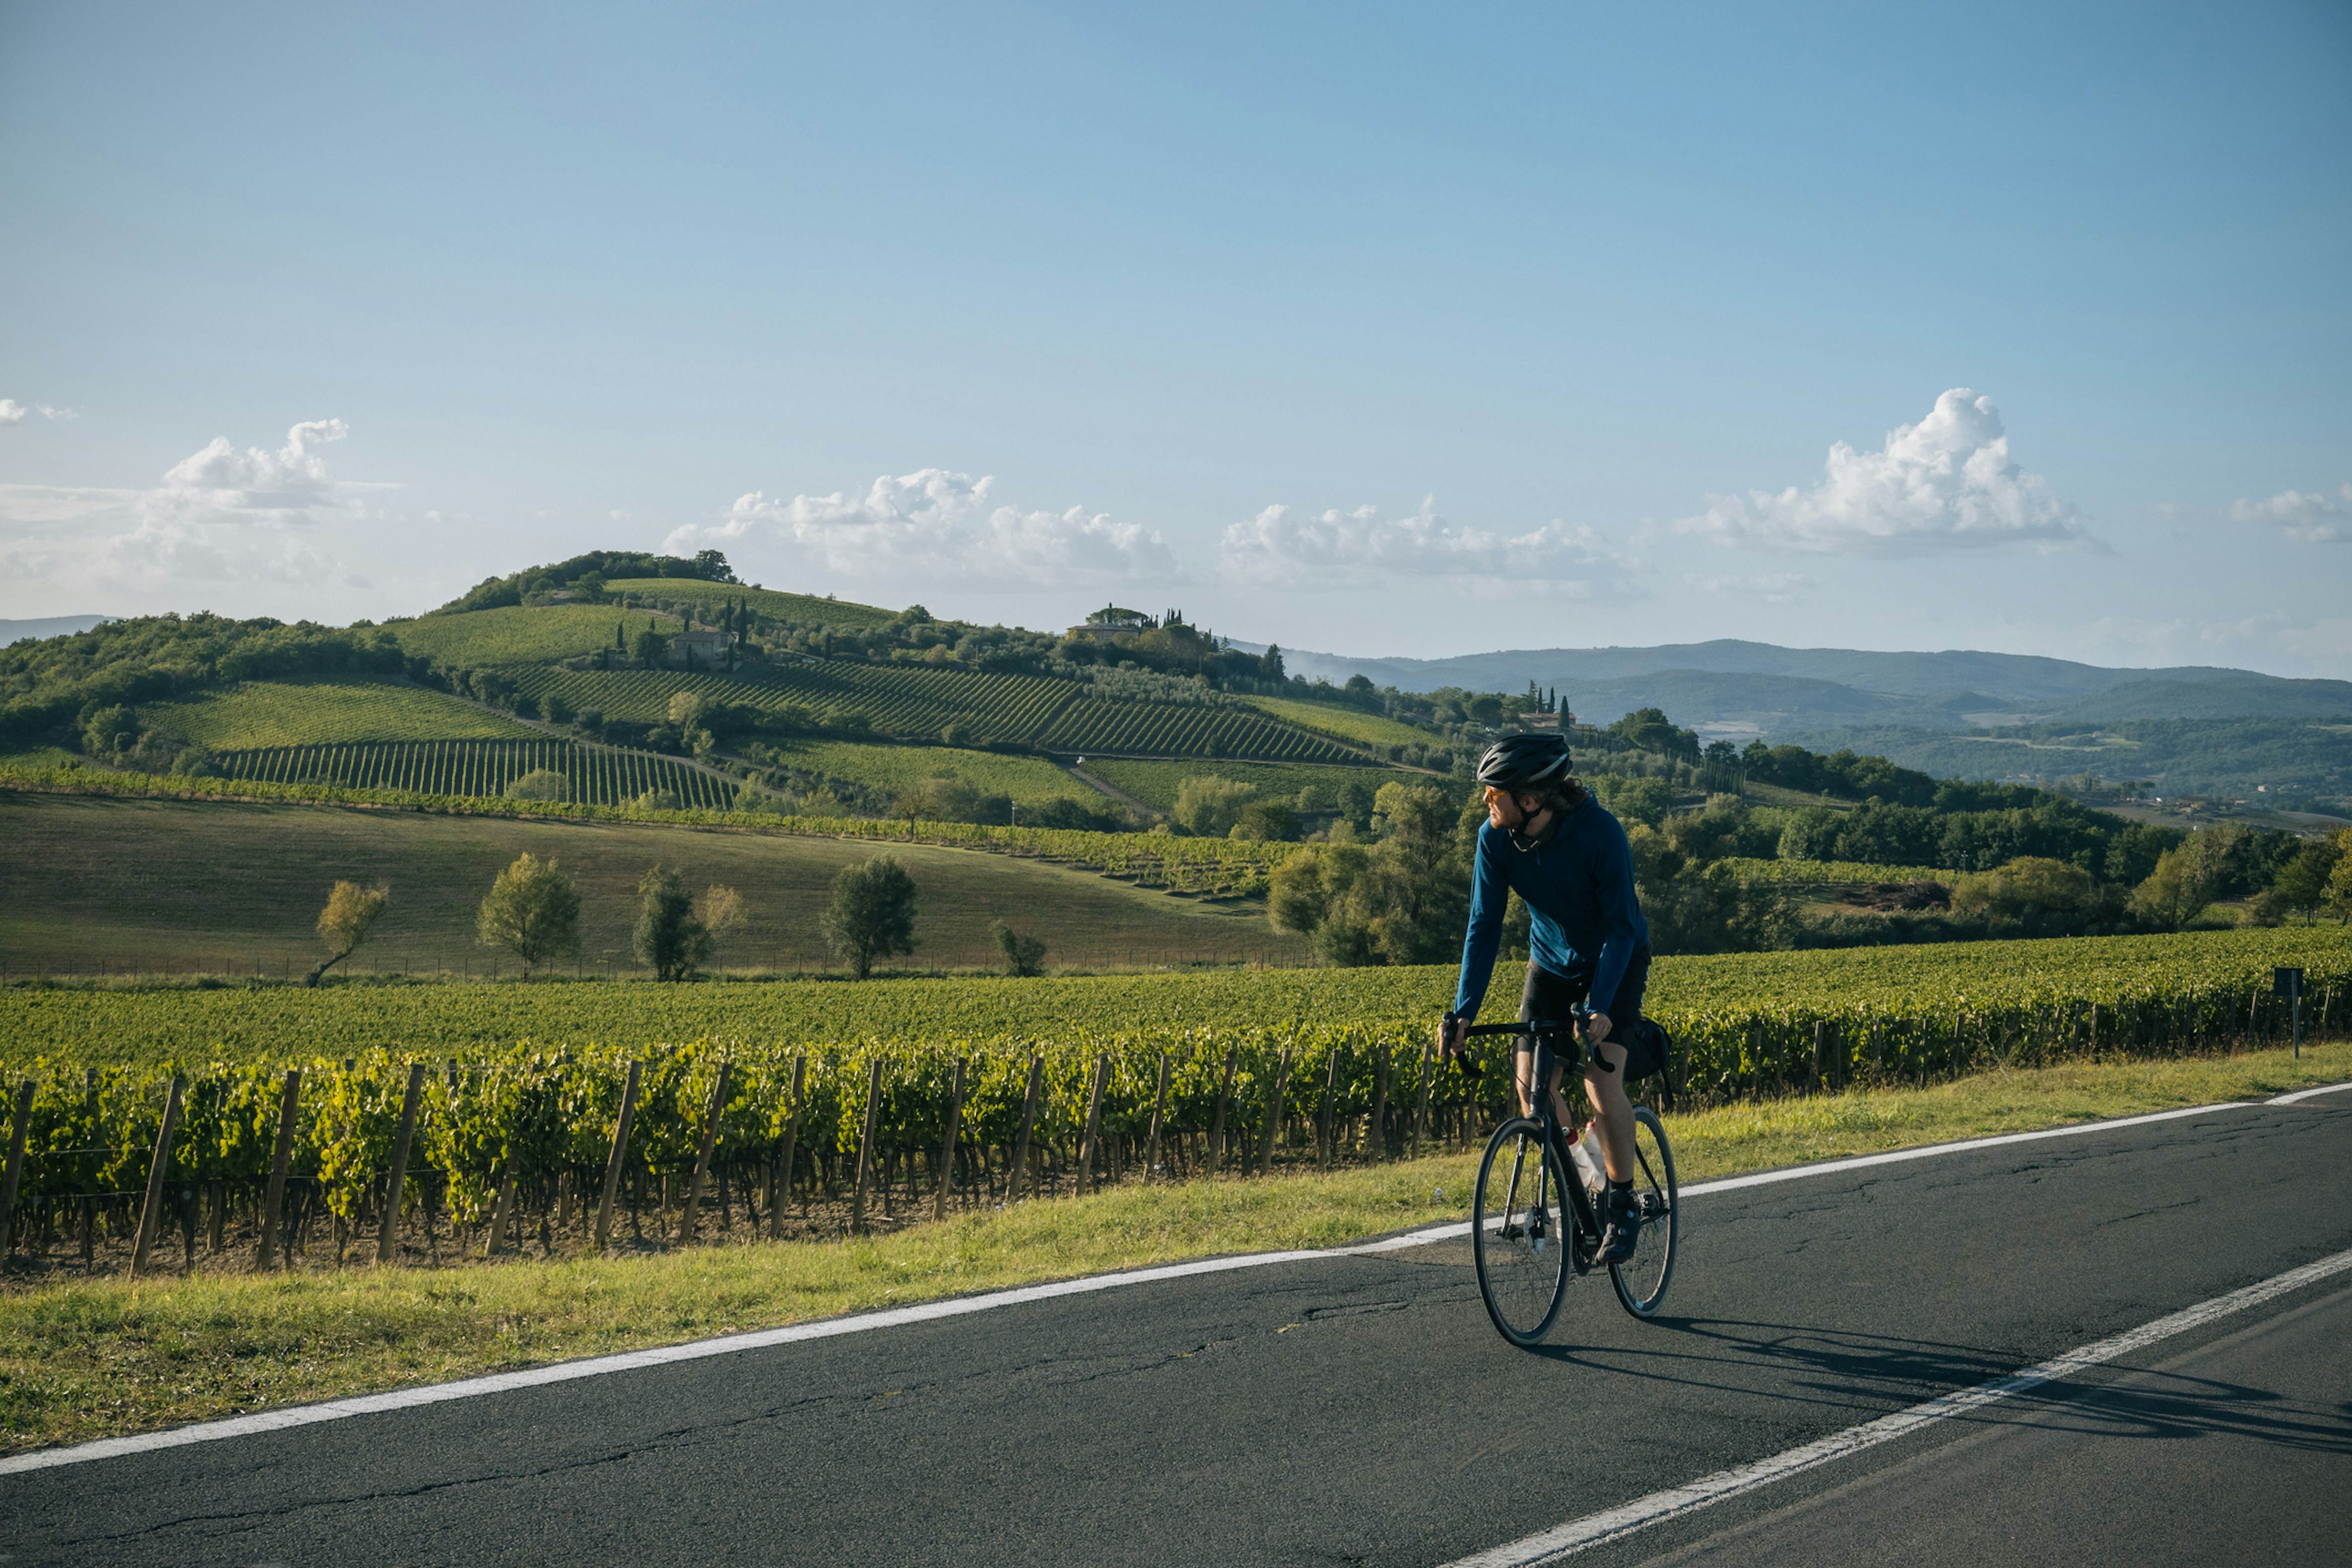 10 best places for a cycling vacation in 2022 - Cycle%20Italy